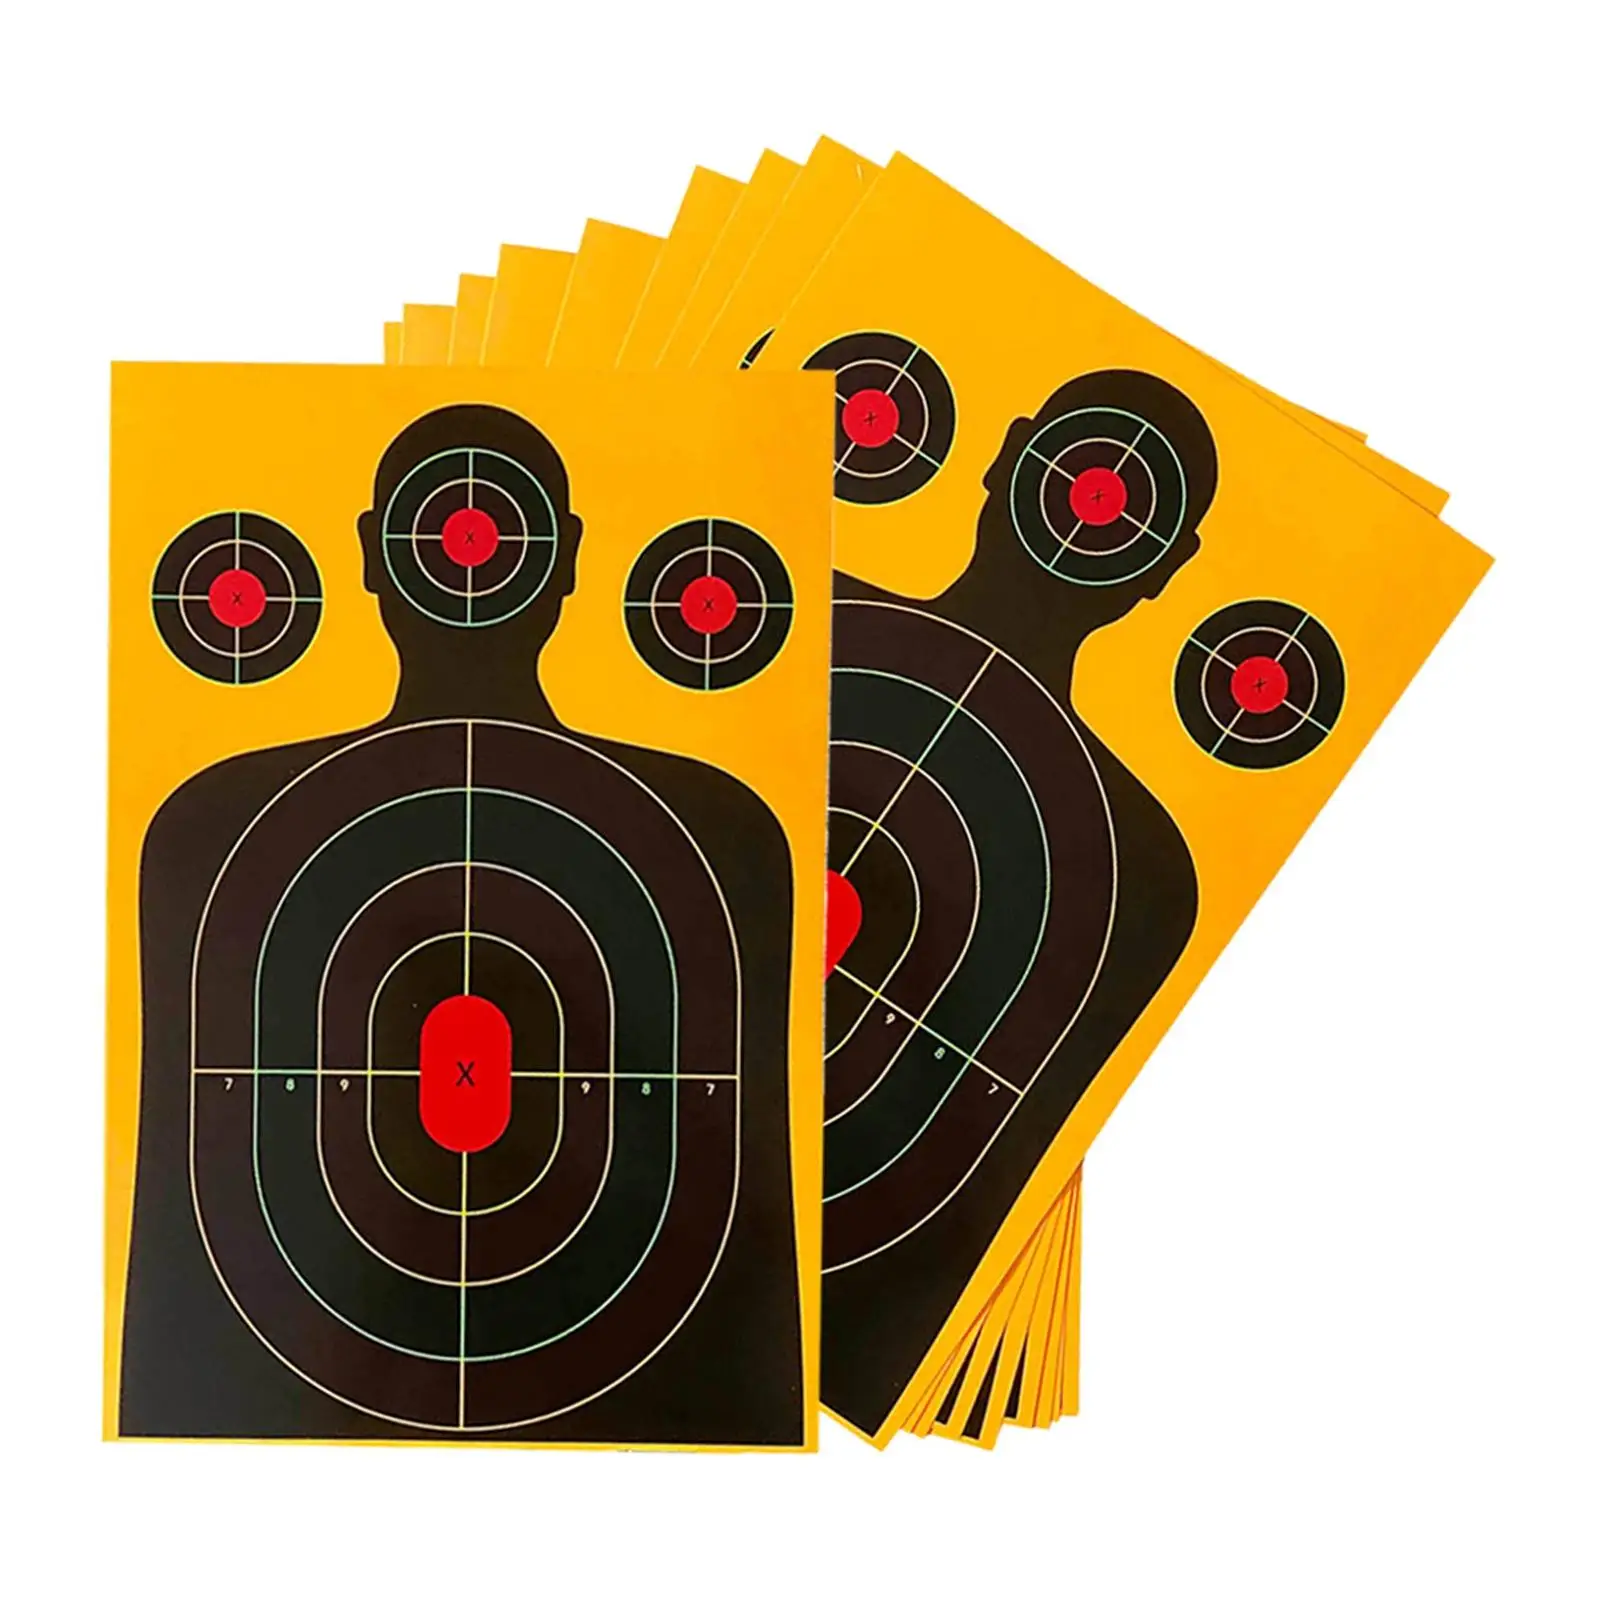 10 Pieces Silhouette Target Wargame Professional Hunting Silhouette Target